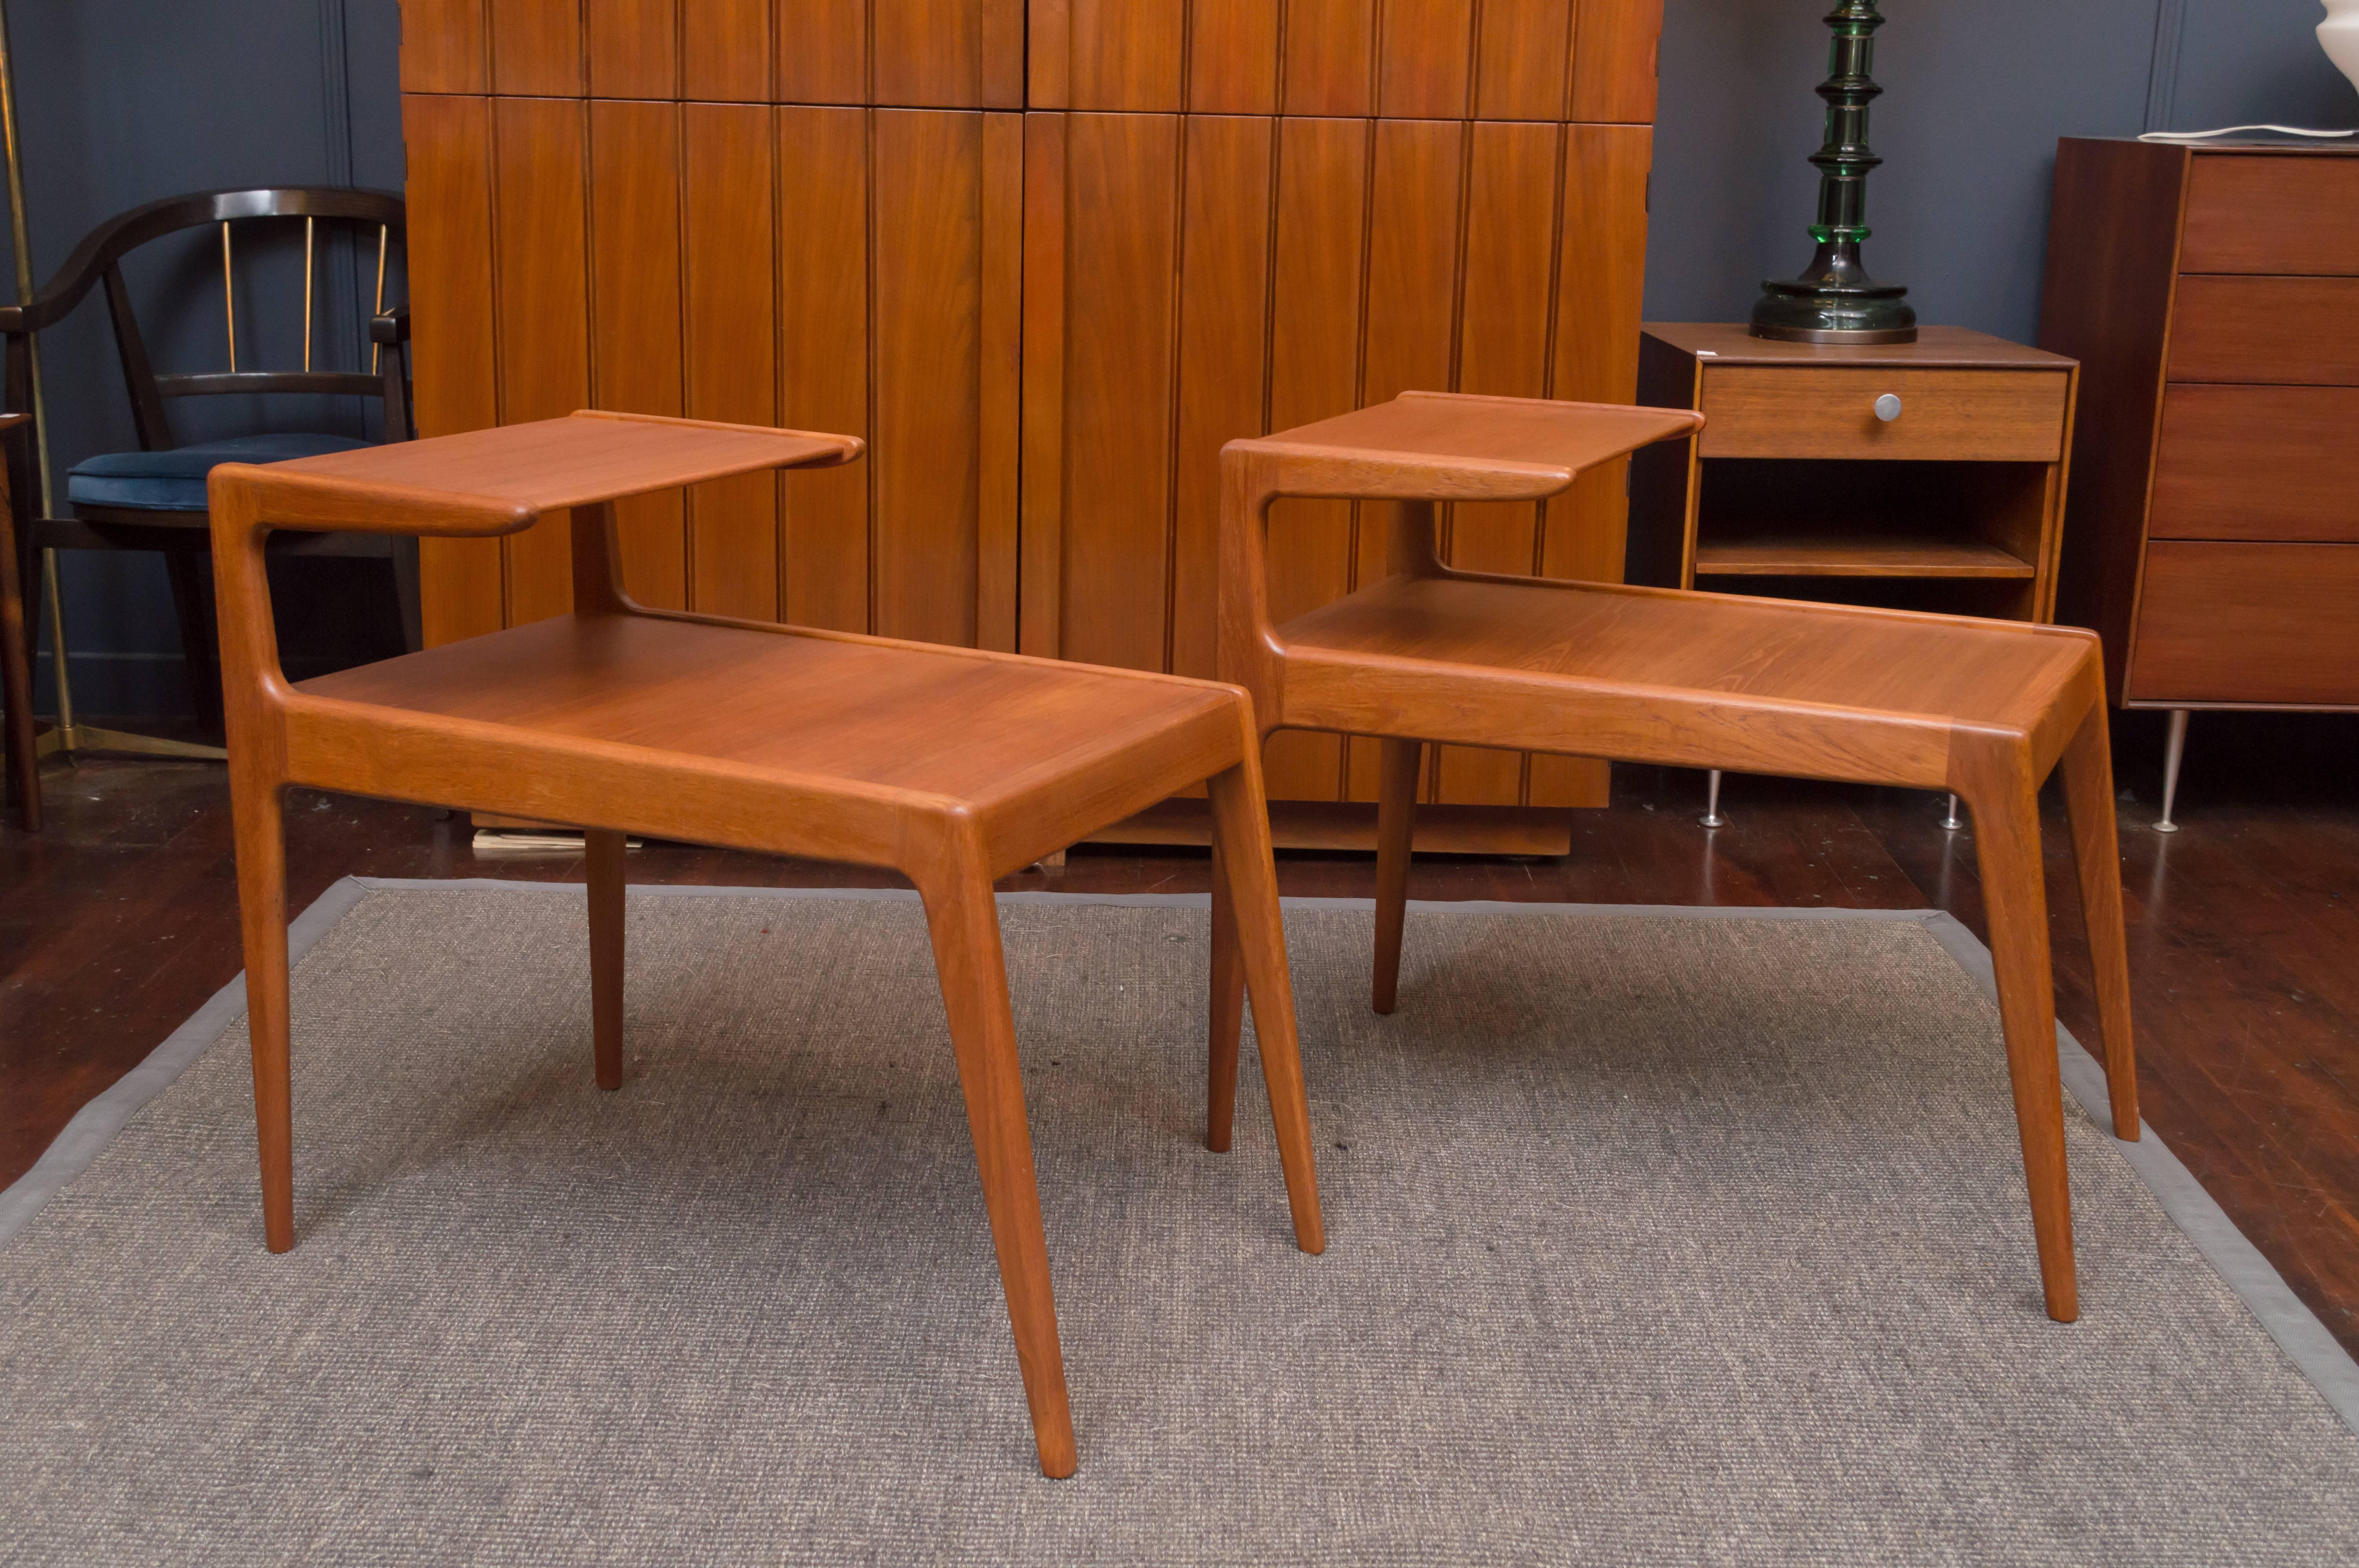 Danish modern teak side tables designed by Kurt Ostervig, Denmark. Newly refinished and ready to enjoy.